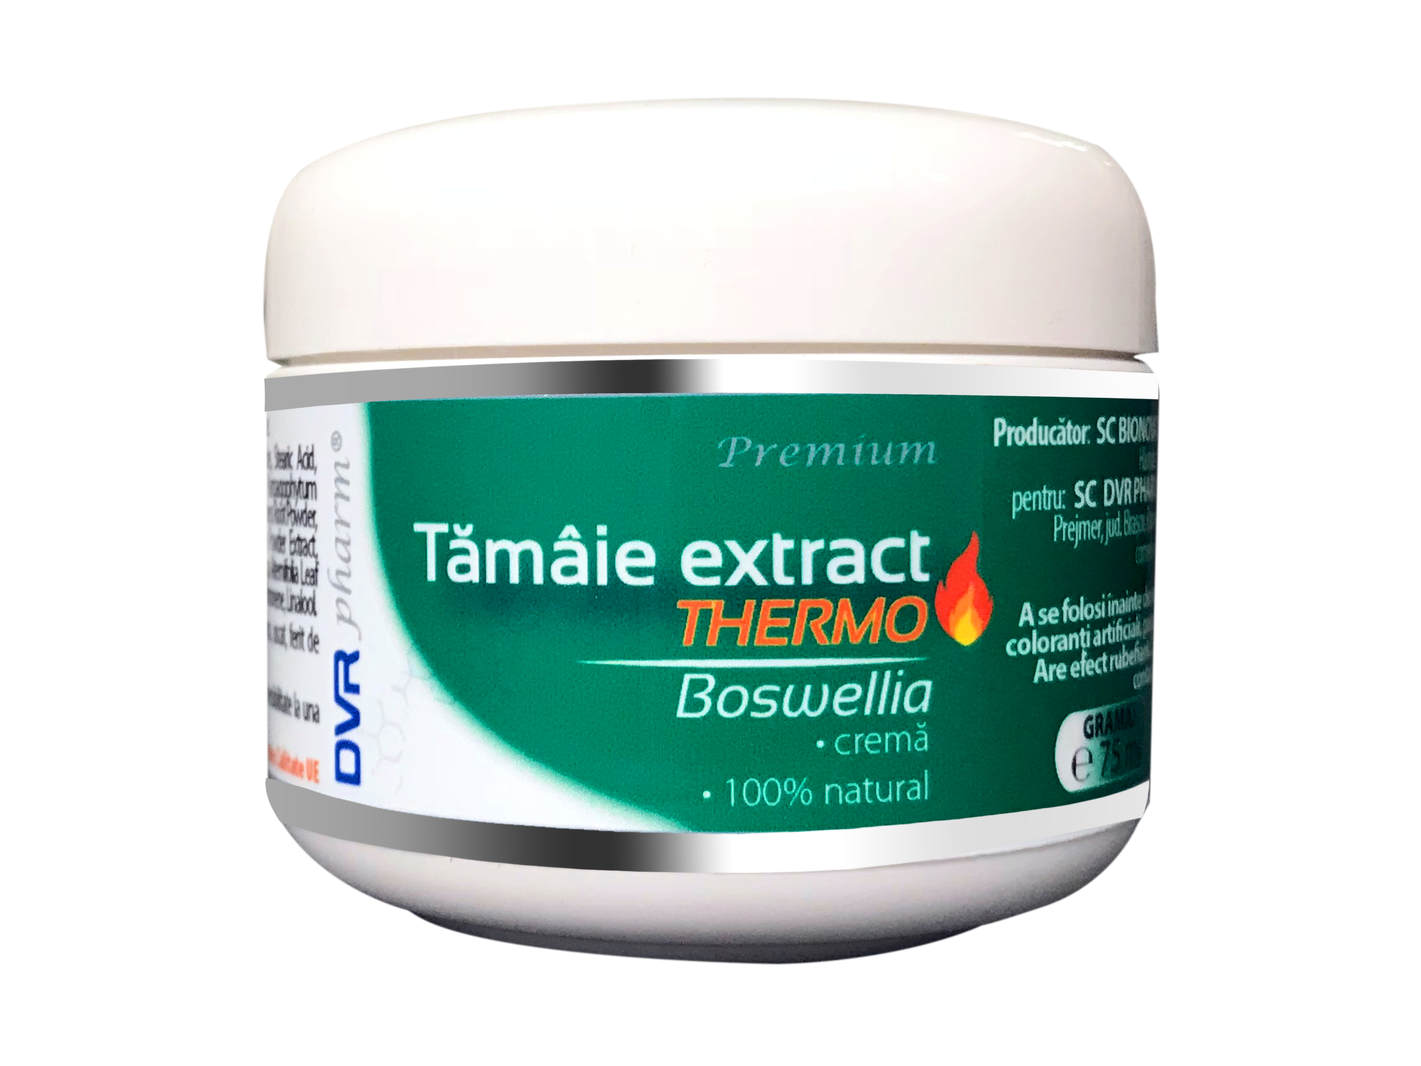 Tamaie extract Thermo